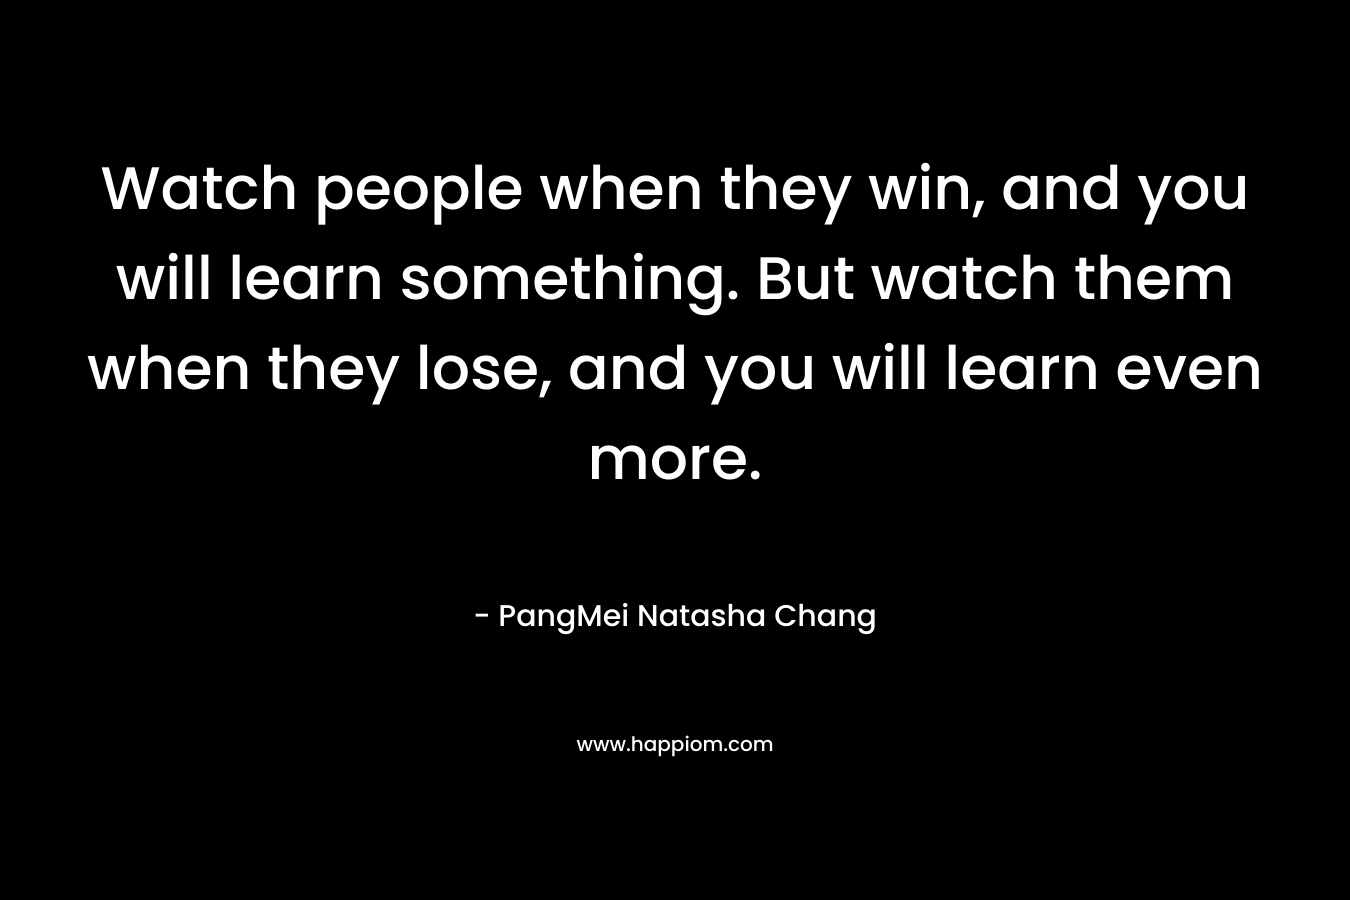 Watch people when they win, and you will learn something. But watch them when they lose, and you will learn even more.